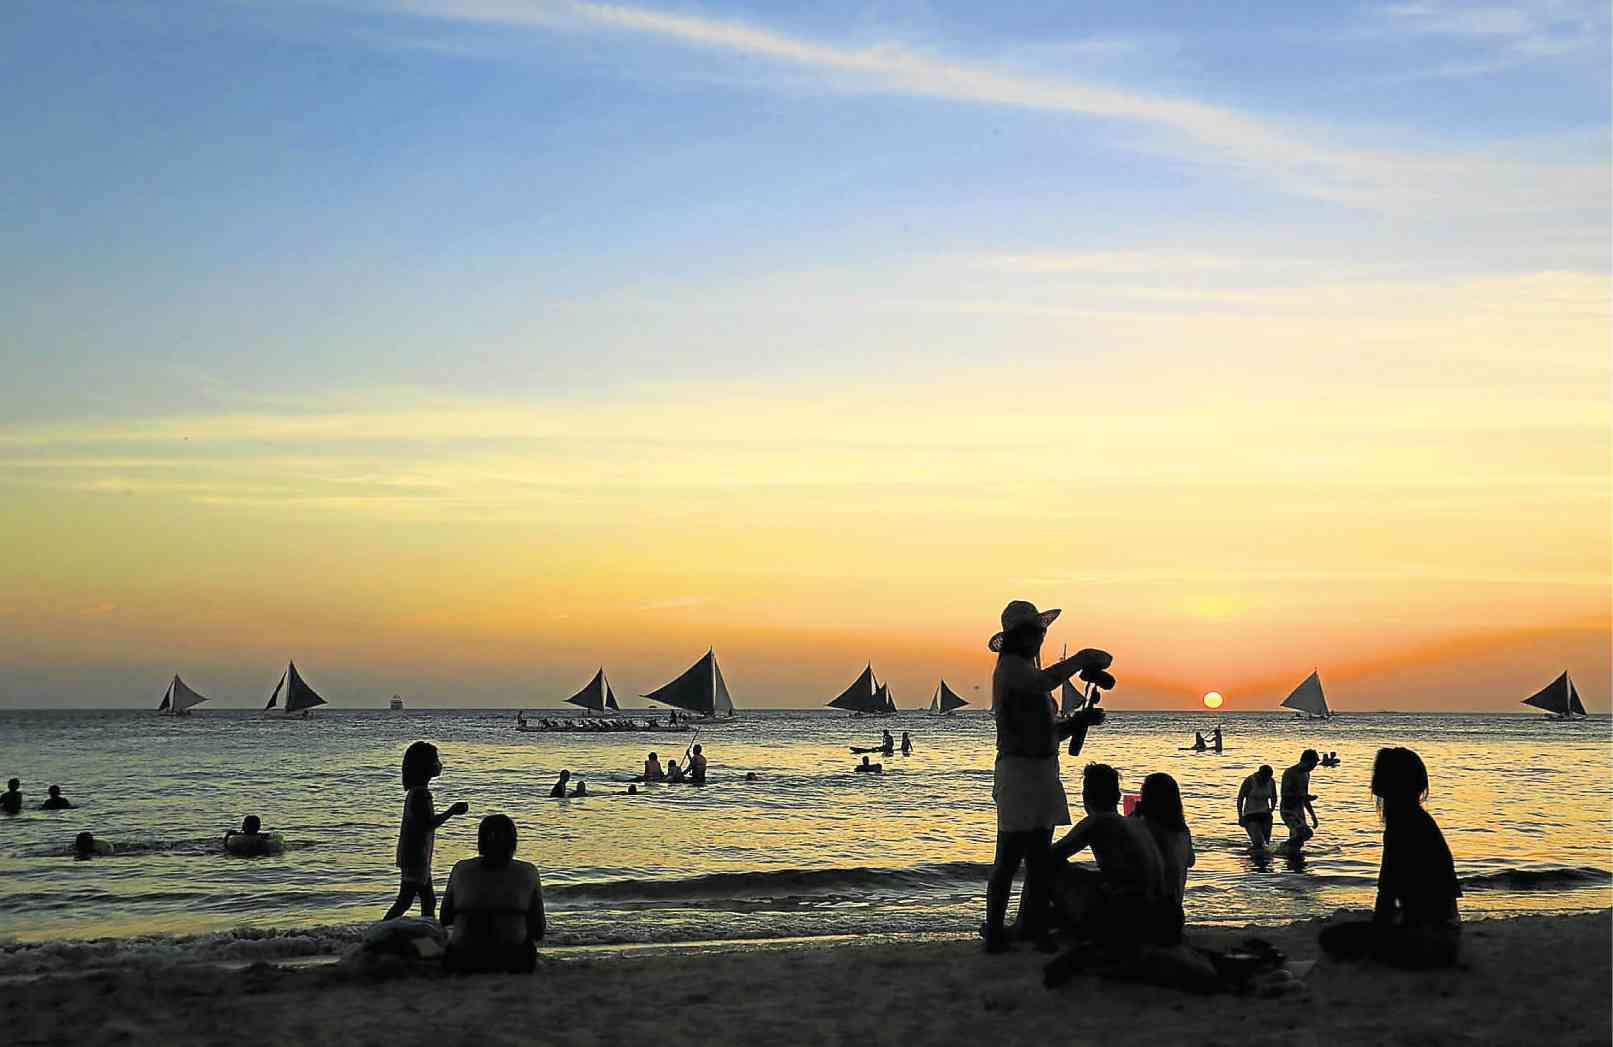 SUNSET IN PARADISE Tourists enjoy the sunset on Boracay Island, one of the top destinations in the country known for its powdery-white sand, turquoise waters and vibrant nightlife. MARK ALVIC ESPLANA / INQUIRER SOUTHERN LUZON